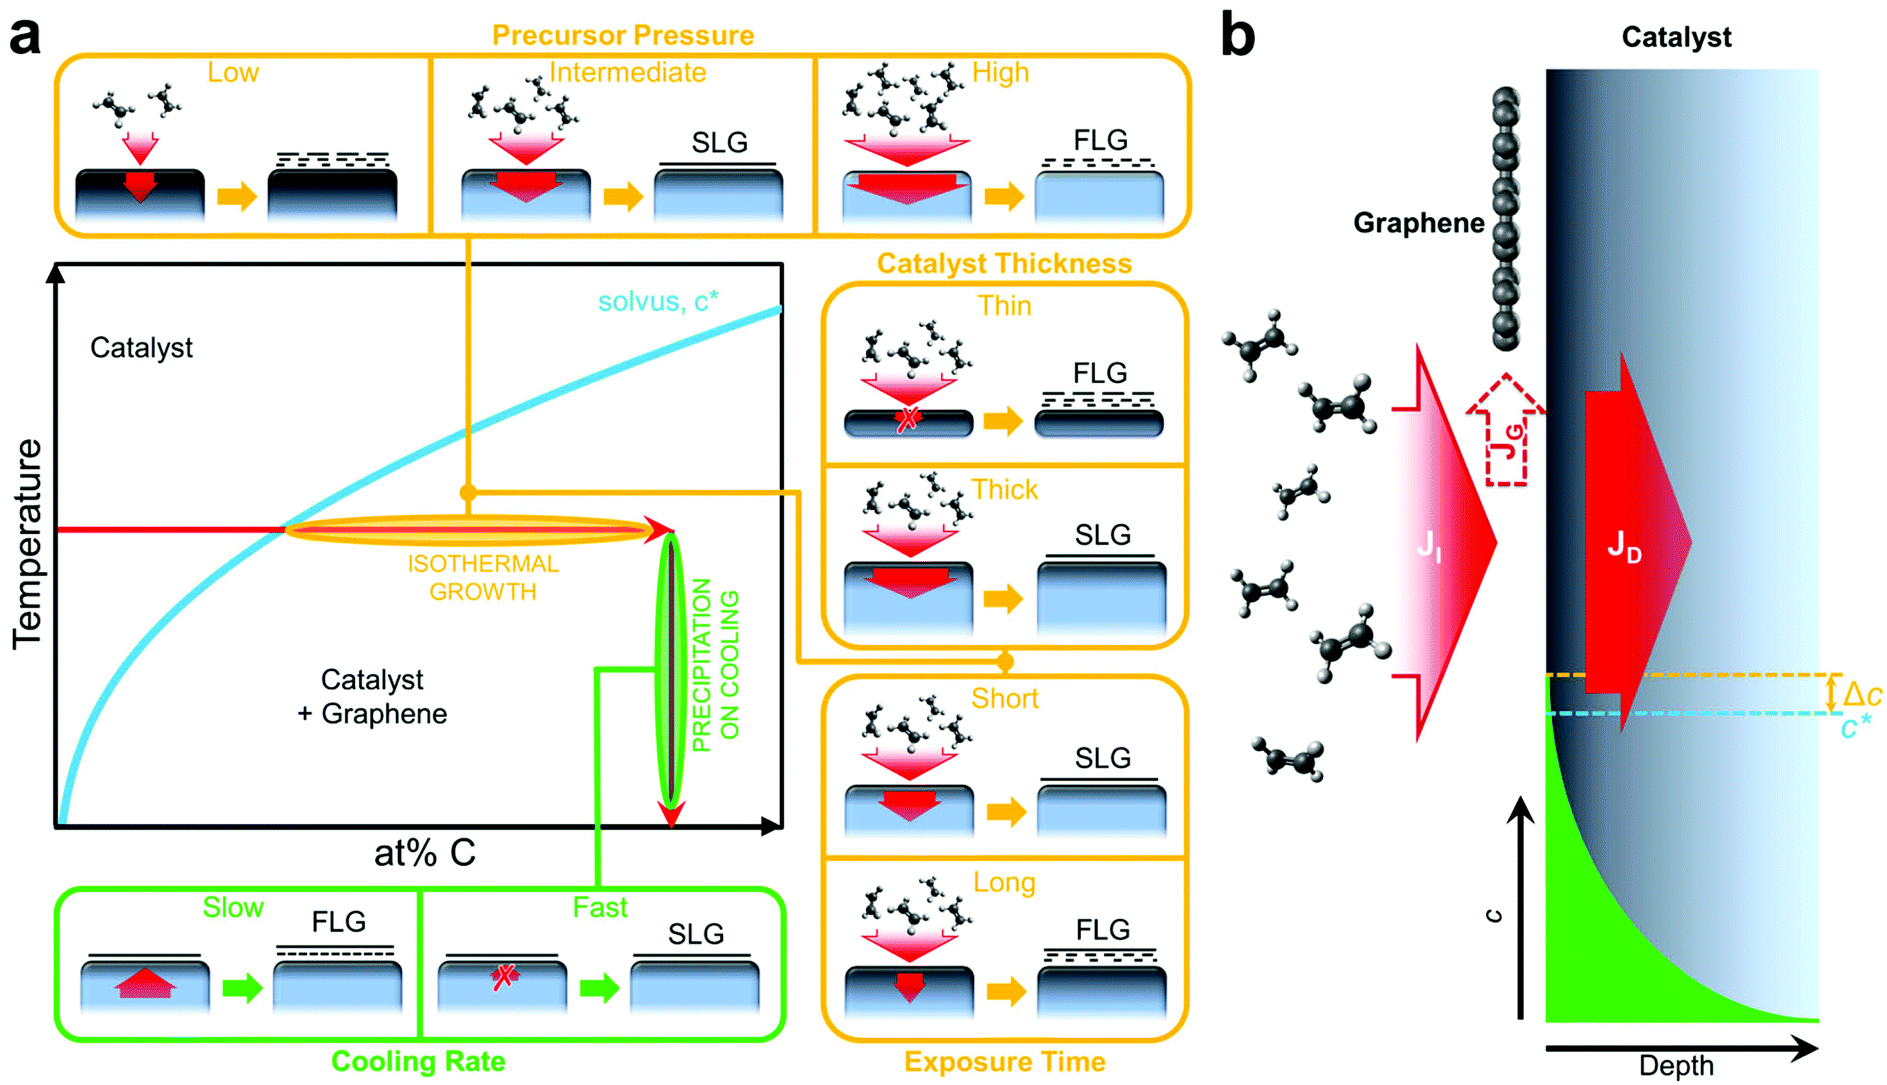 Towards a general growth model for graphene CVD on transition metal catalysts